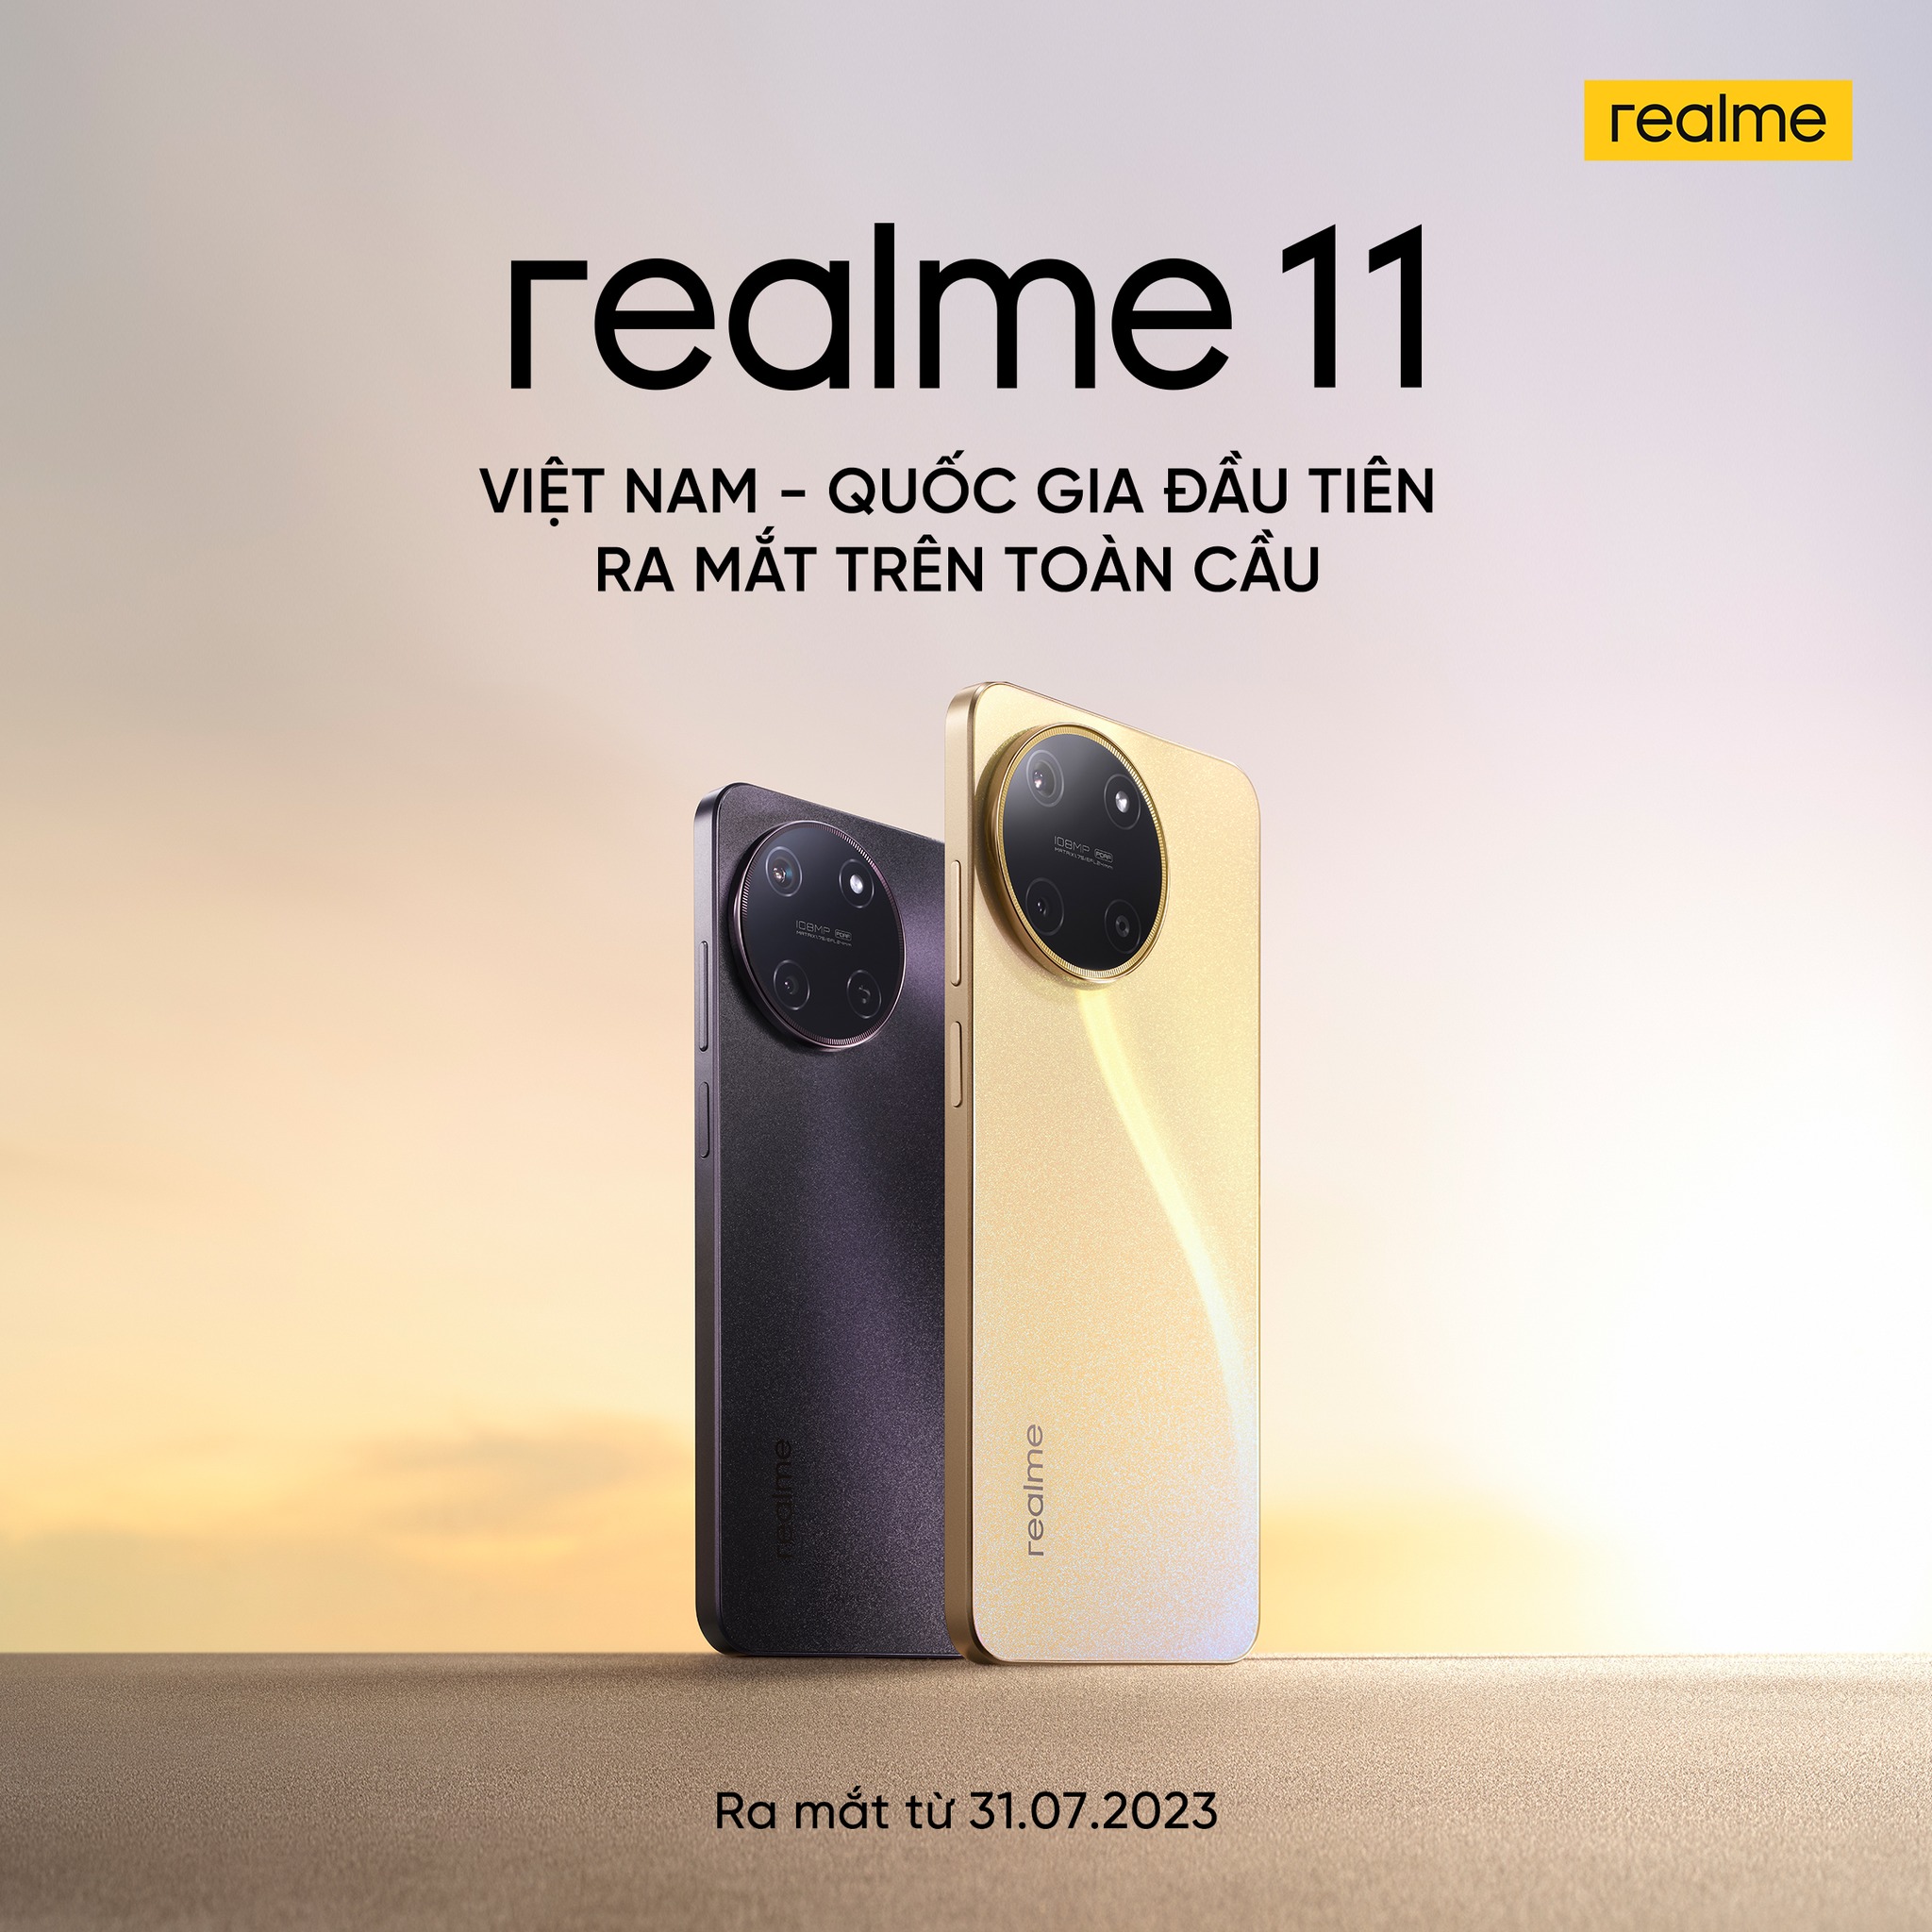 realme 11(4G) Launches In Vietnam - UNBOX PH